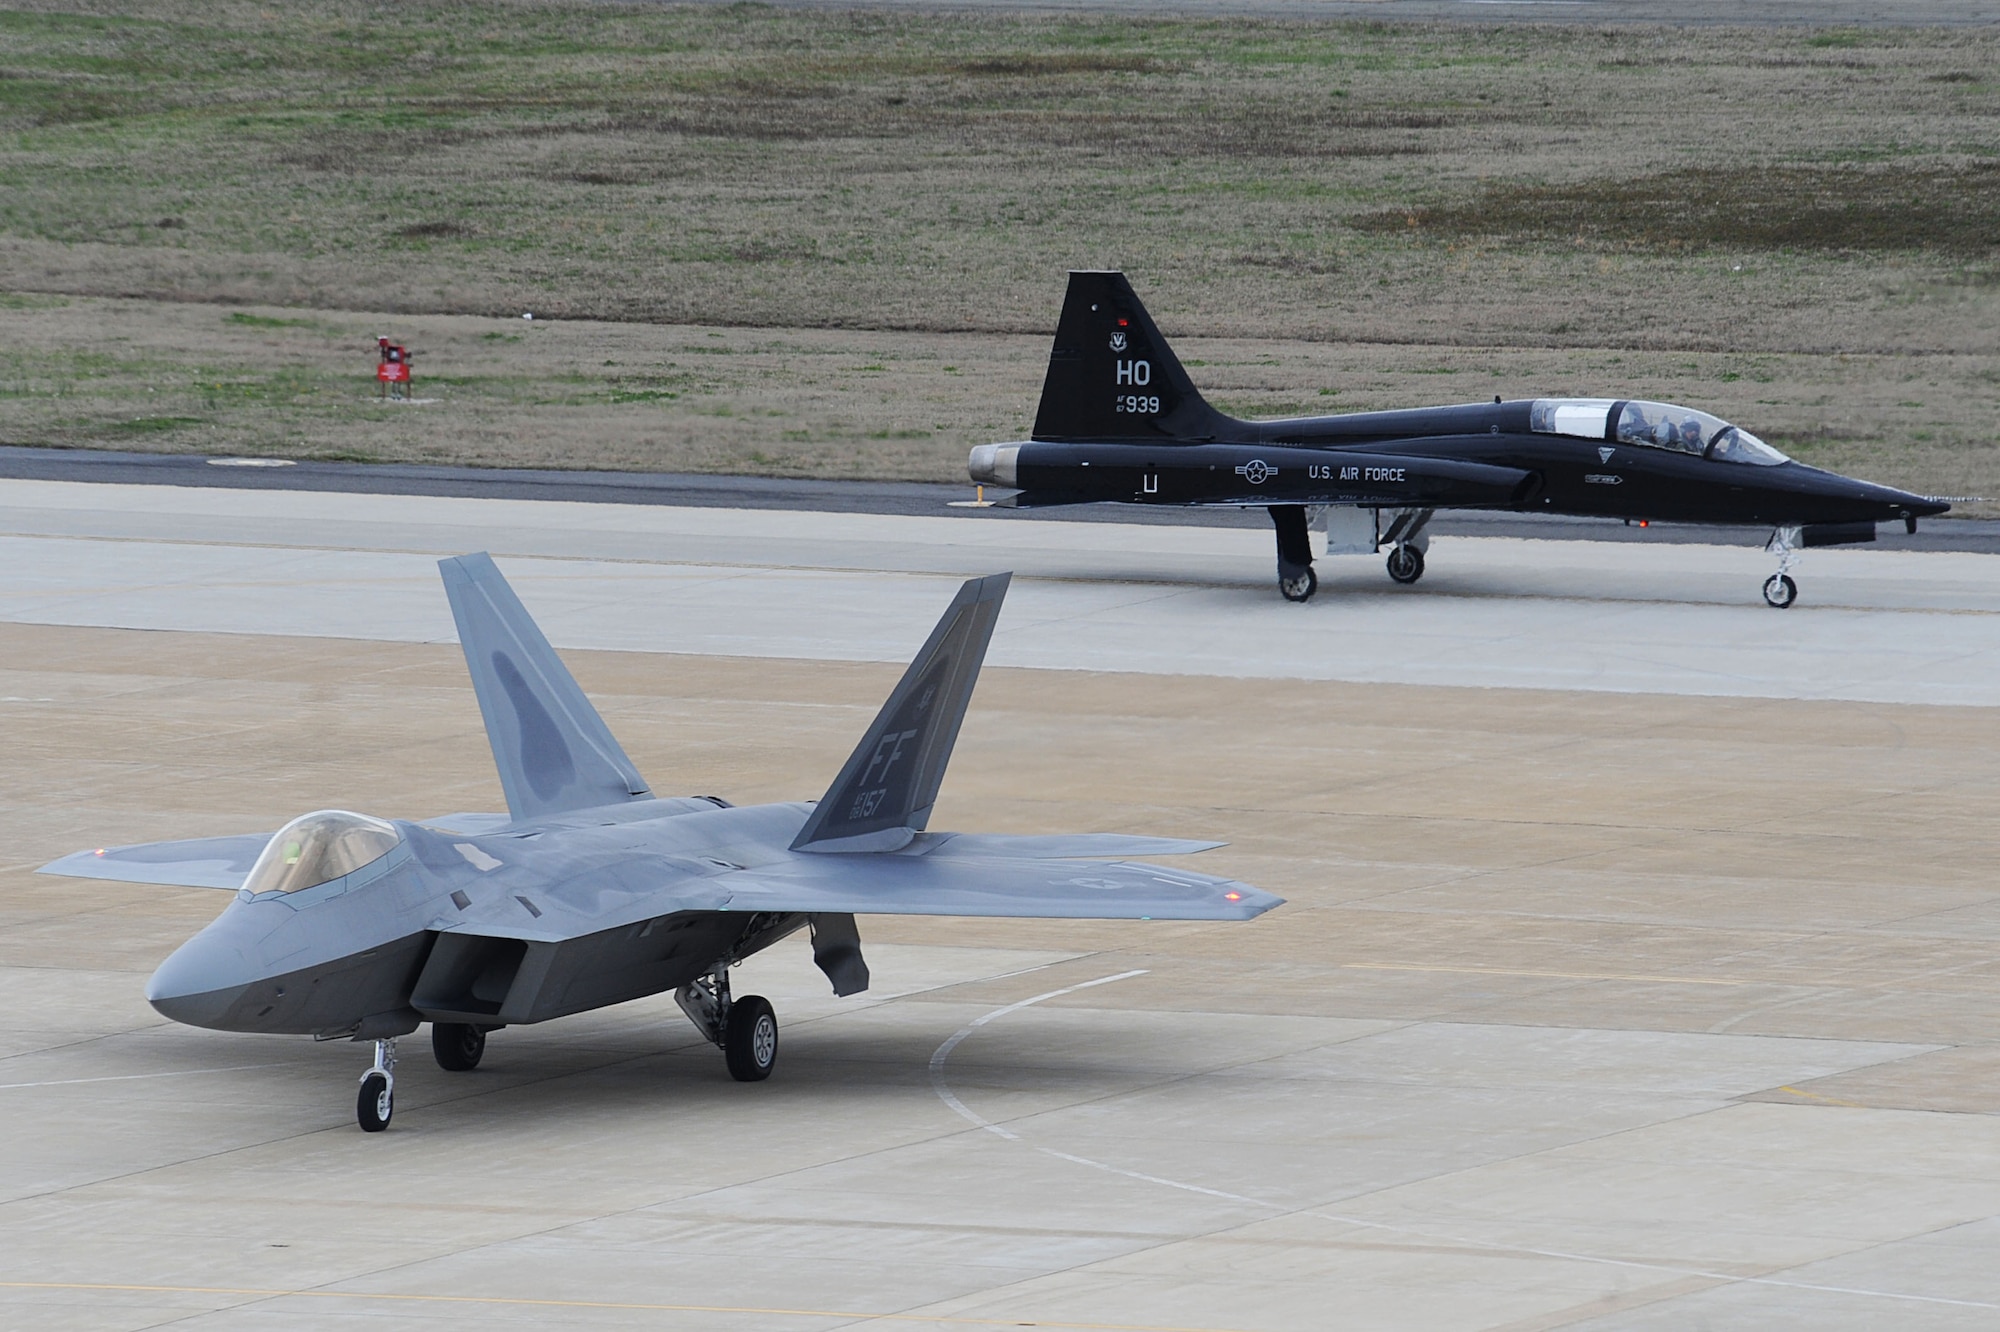 An F-22 Raptor and a T-38 Talon arrive at Langley Air Force Base, Va., April 1, 2011. The T-38 is temporarily assigned to the 1st Fighter Wing to support combat readiness training for the pilots. (U.S. Air Force photo by Senior Airman Brian Ybarbo/Released)
